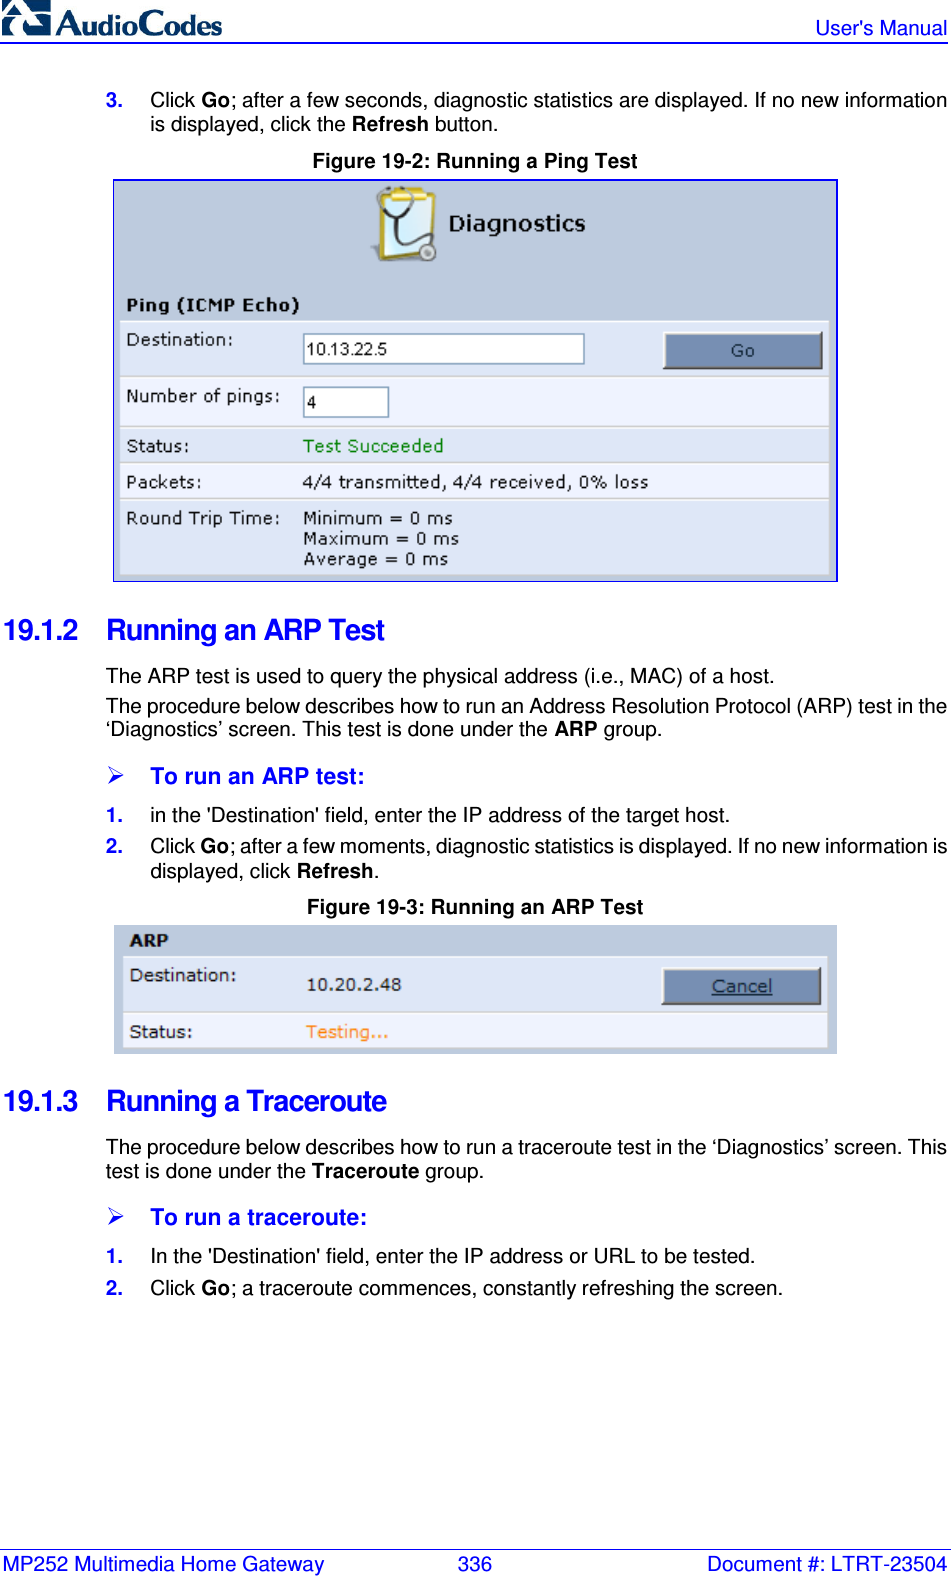 MP252 Multimedia Home Gateway  336  Document #: LTRT-23504   User&apos;s Manual  3.  Click Go; after a few seconds, diagnostic statistics are displayed. If no new information is displayed, click the Refresh button. Figure 19-2: Running a Ping Test  19.1.2  Running an ARP Test The ARP test is used to query the physical address (i.e., MAC) of a host.  The procedure below describes how to run an Address Resolution Protocol (ARP) test in the ‘Diagnostics’ screen. This test is done under the ARP group.  To run an ARP test: 1.  in the &apos;Destination&apos; field, enter the IP address of the target host. 2.  Click Go; after a few moments, diagnostic statistics is displayed. If no new information is displayed, click Refresh. Figure 19-3: Running an ARP Test  19.1.3  Running a Traceroute The procedure below describes how to run a traceroute test in the ‘Diagnostics’ screen. This test is done under the Traceroute group.  To run a traceroute: 1.  In the &apos;Destination&apos; field, enter the IP address or URL to be tested. 2.  Click Go; a traceroute commences, constantly refreshing the screen. 